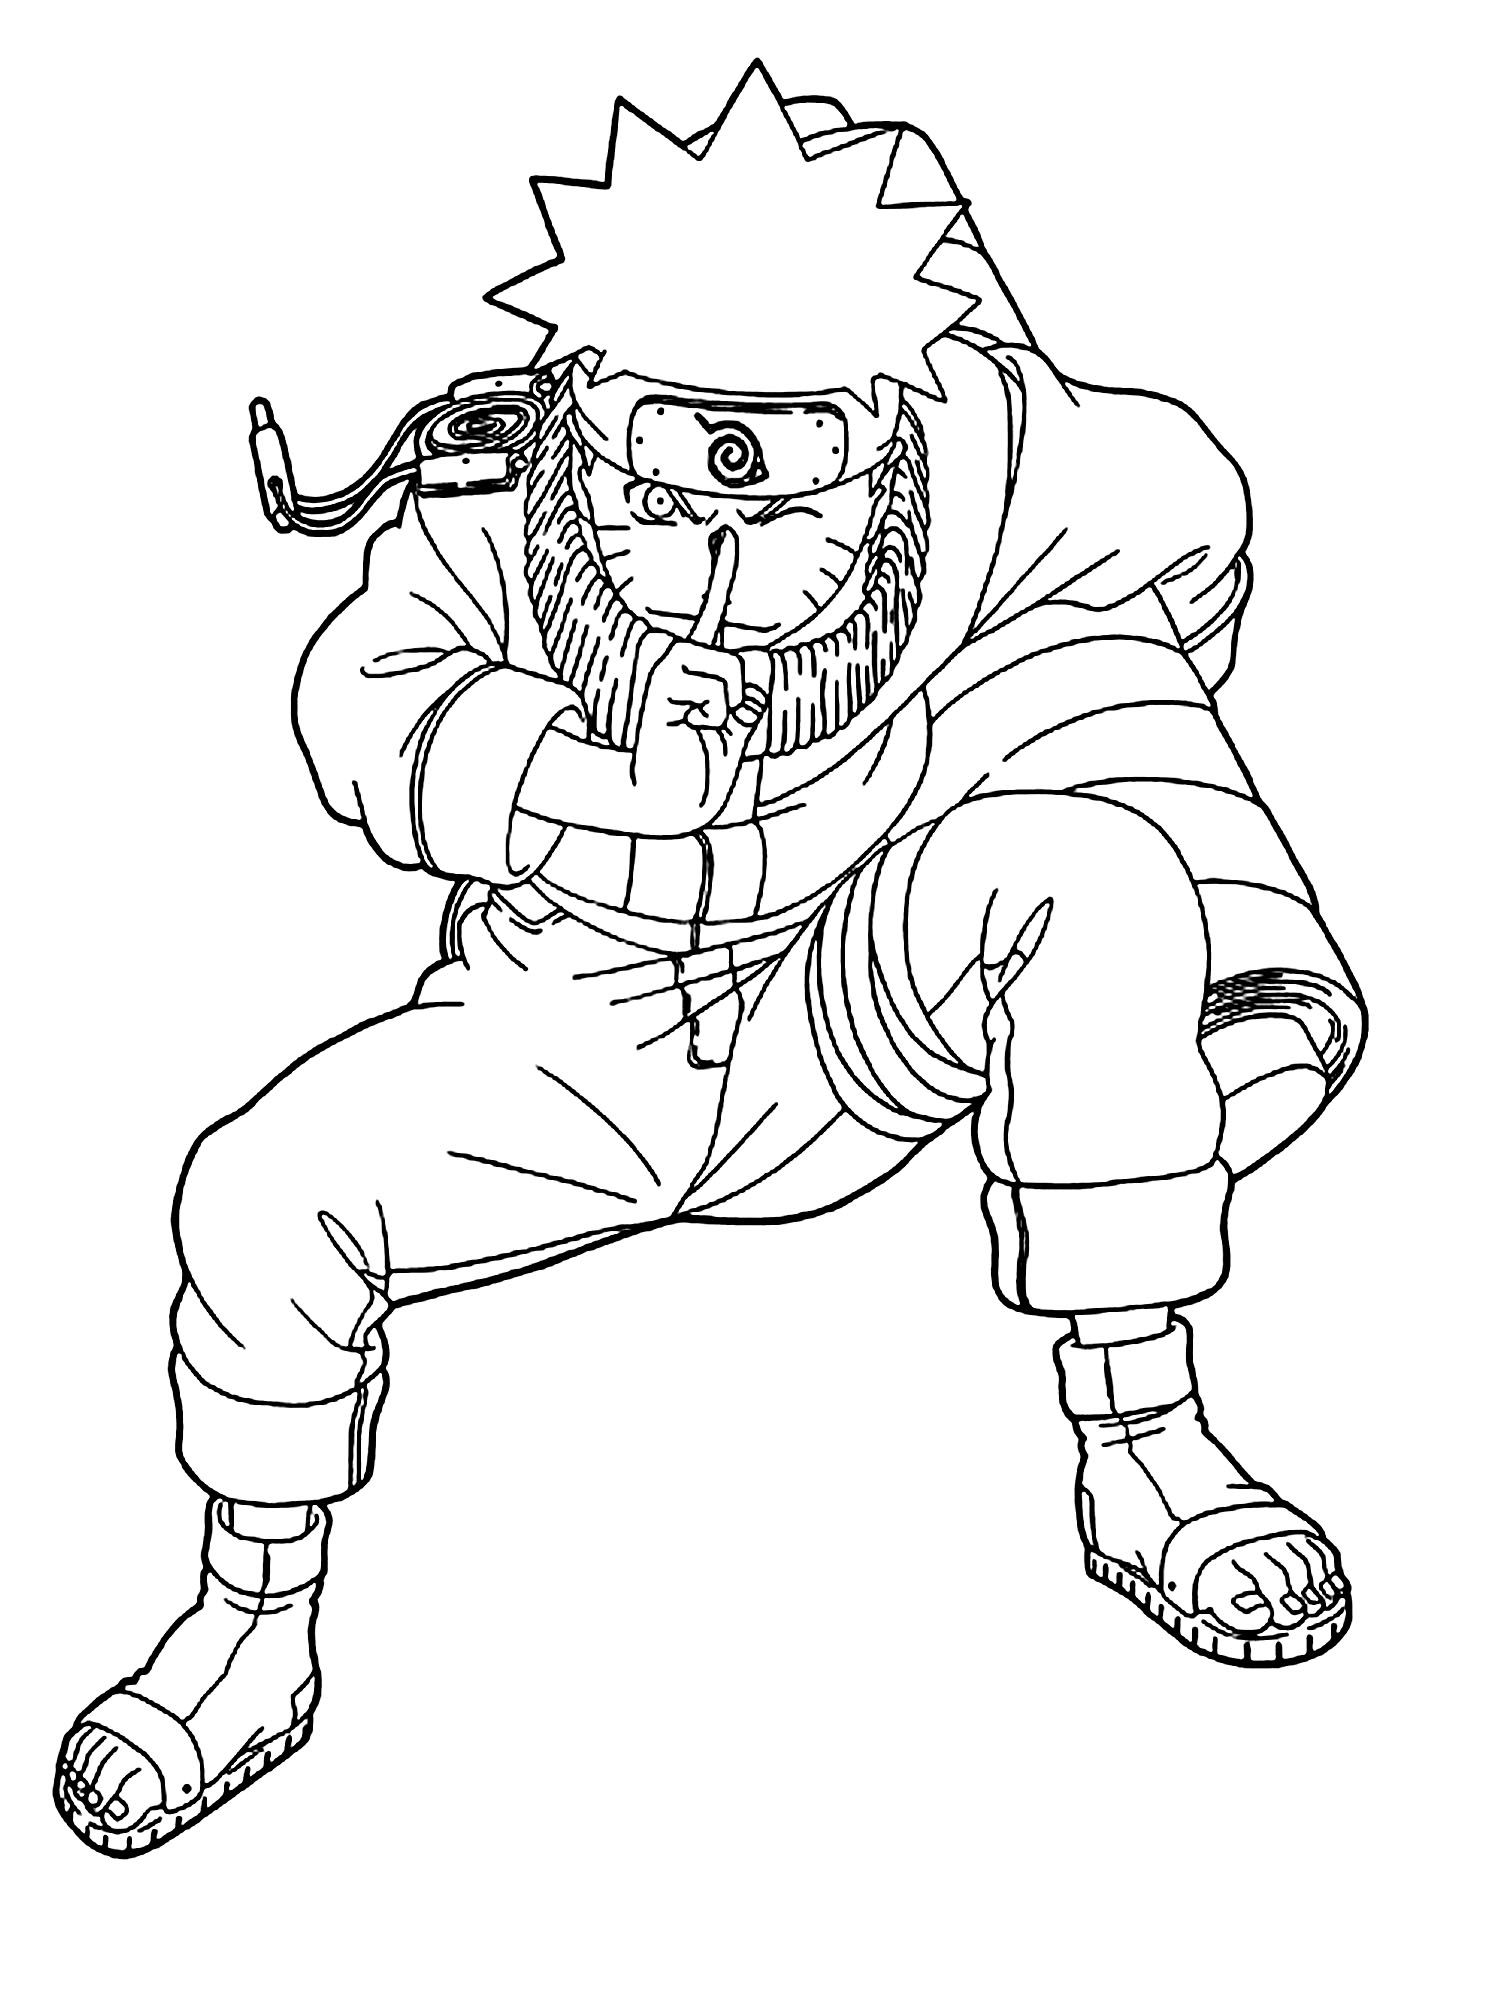 Download Naruto To Print For Free Naruto Kids Coloring Pages